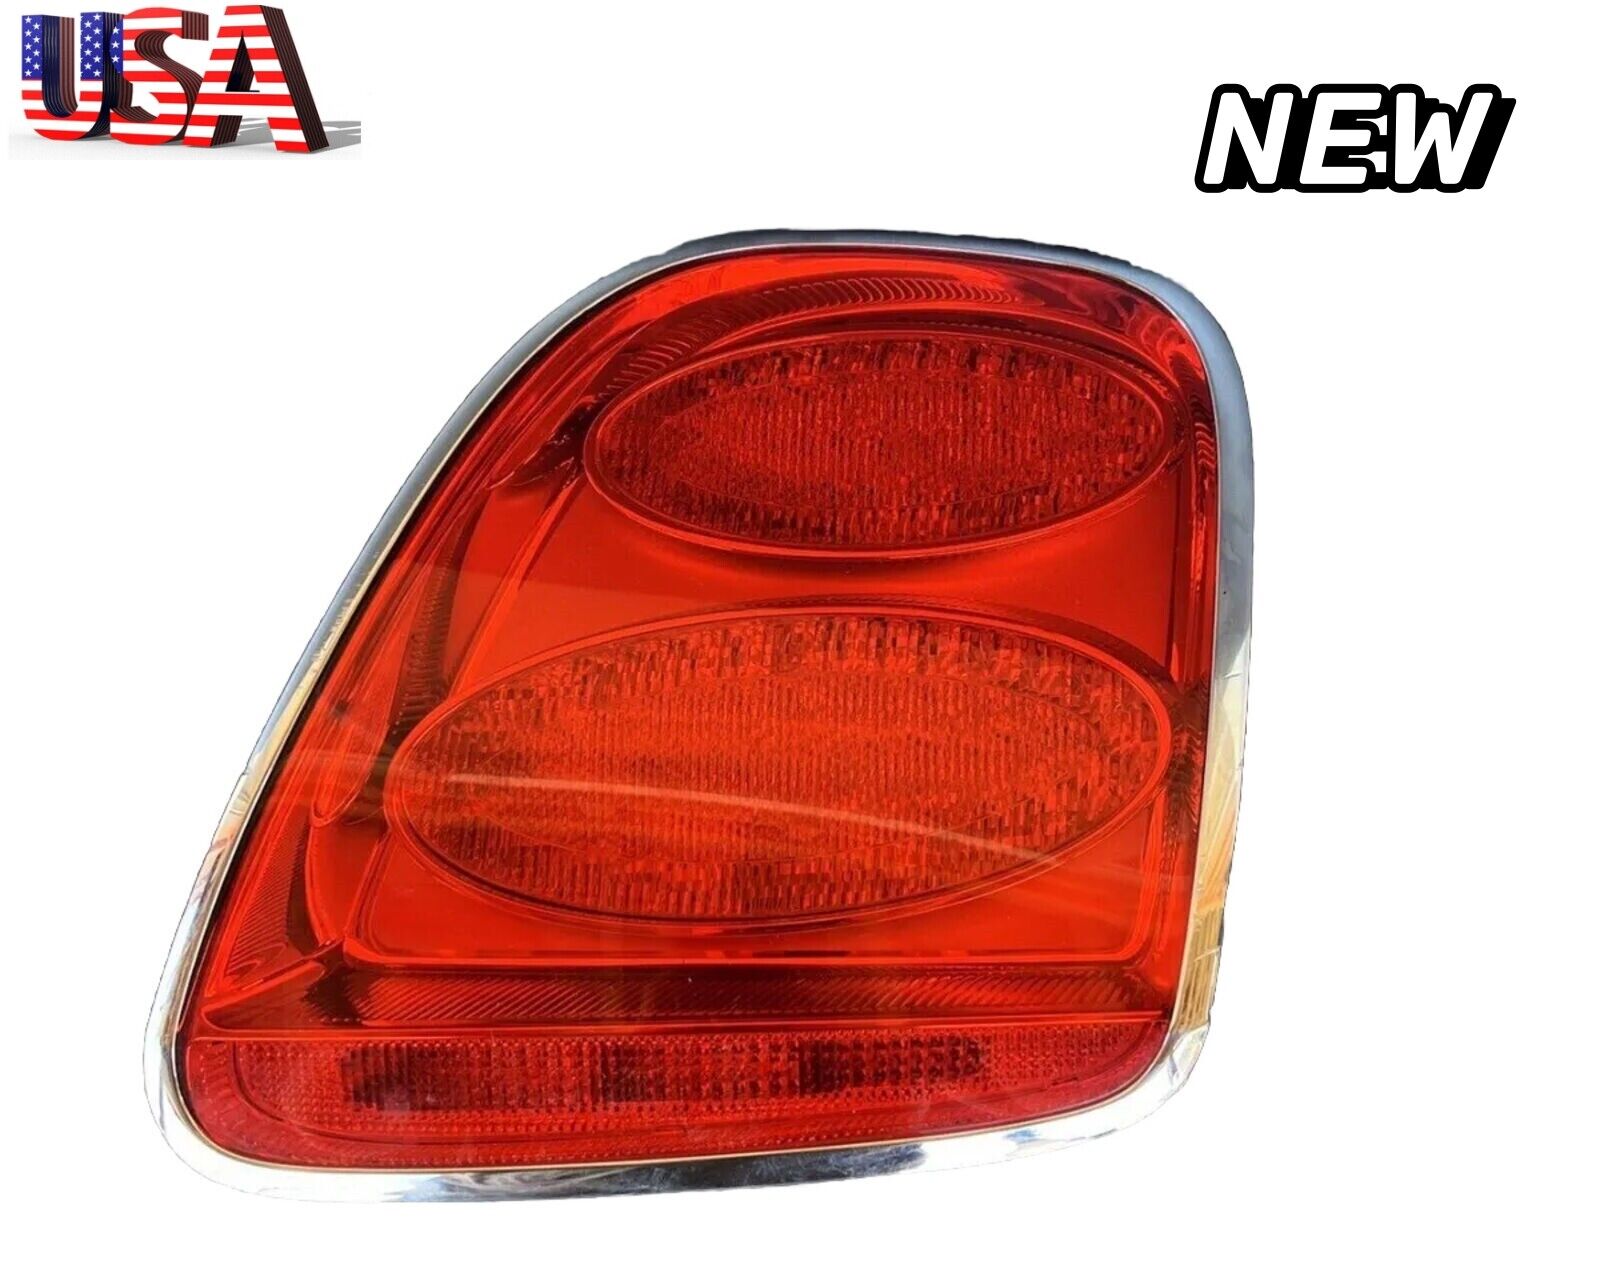 Brand New Rear Right Tail Light Fits Bentley Continental Flying Spur 2009 - 2012